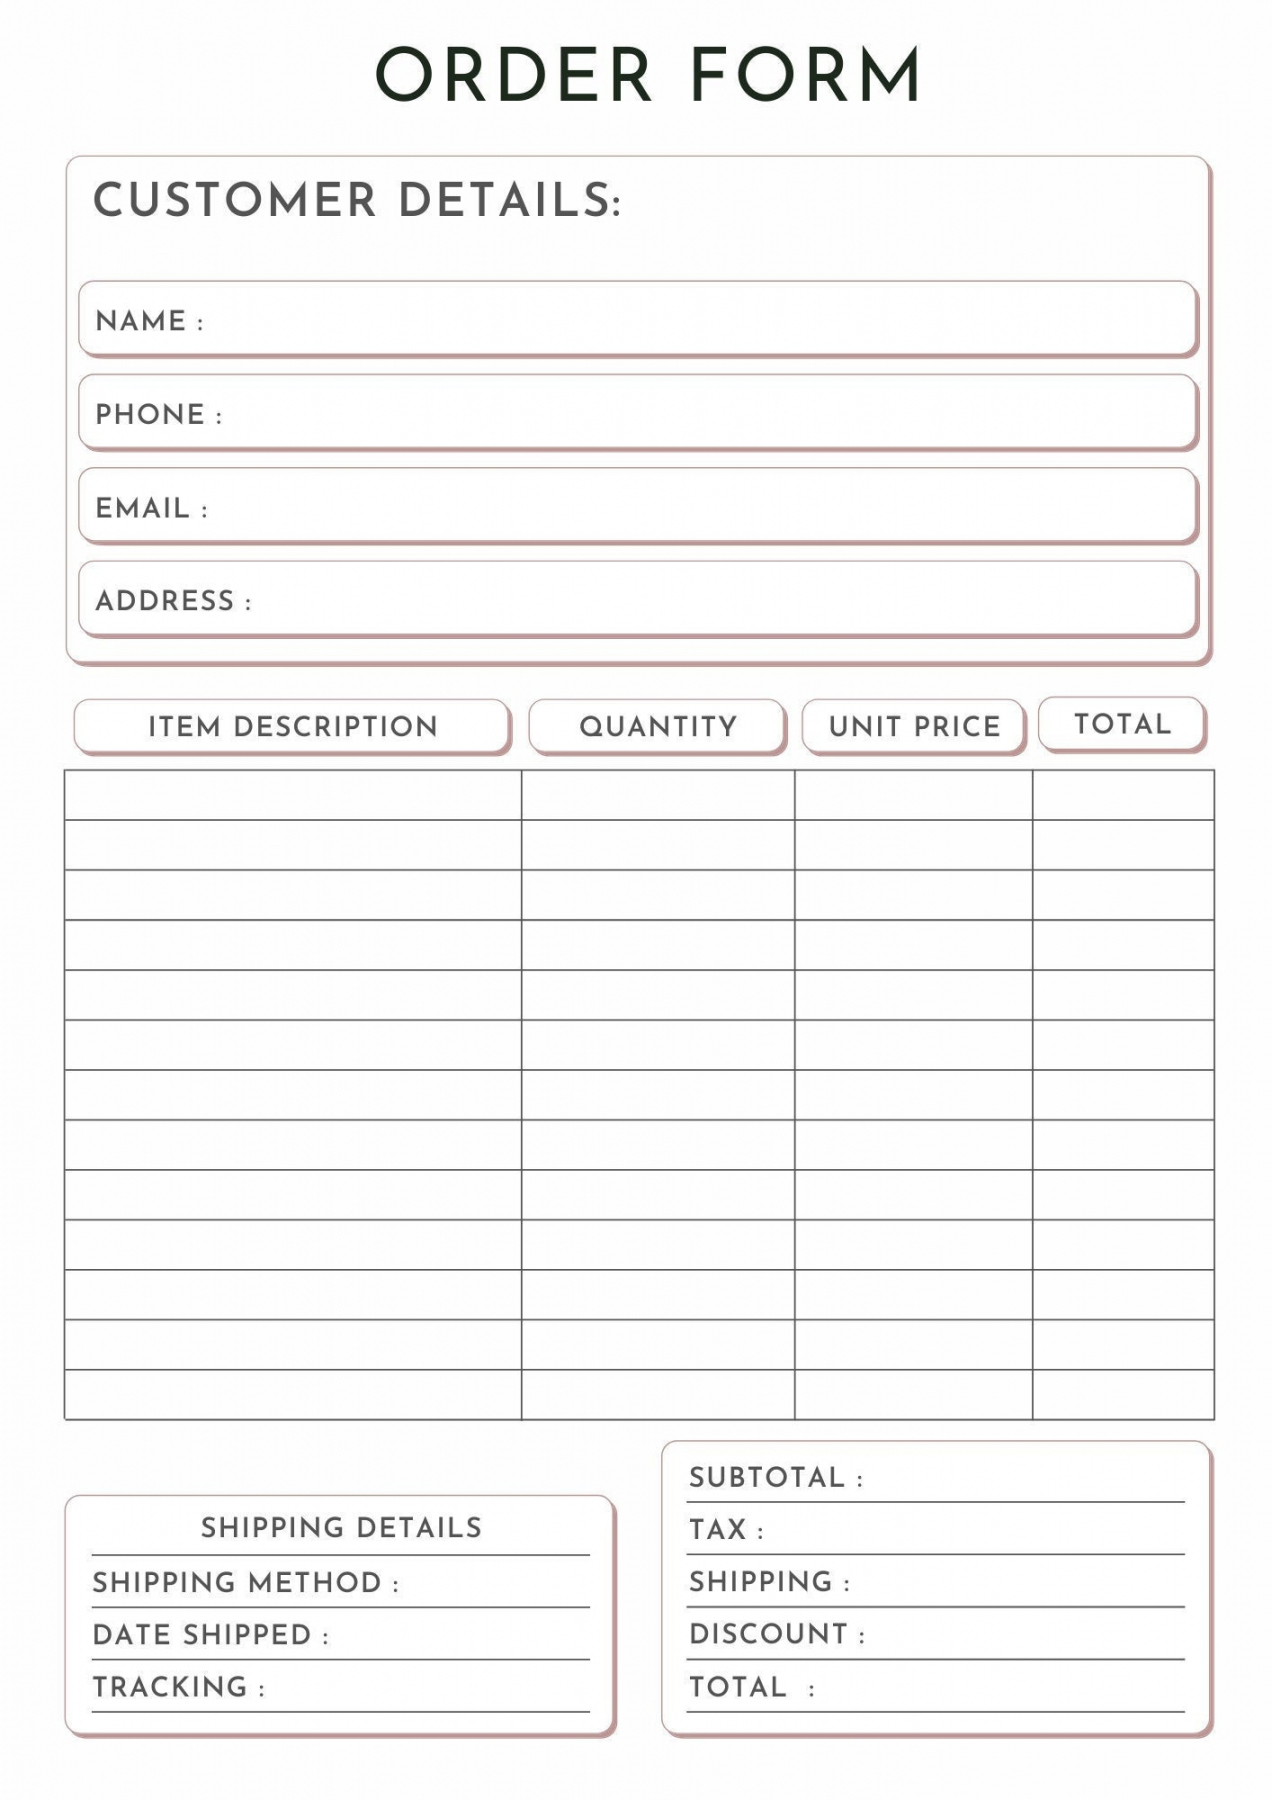 Small Business Free Printable Order Forms - Printable - Small Business Order Form  Printable Digital Download  Simple, Easy To  Use Order Form  Order Tracker  Tracker for Orders  Custom